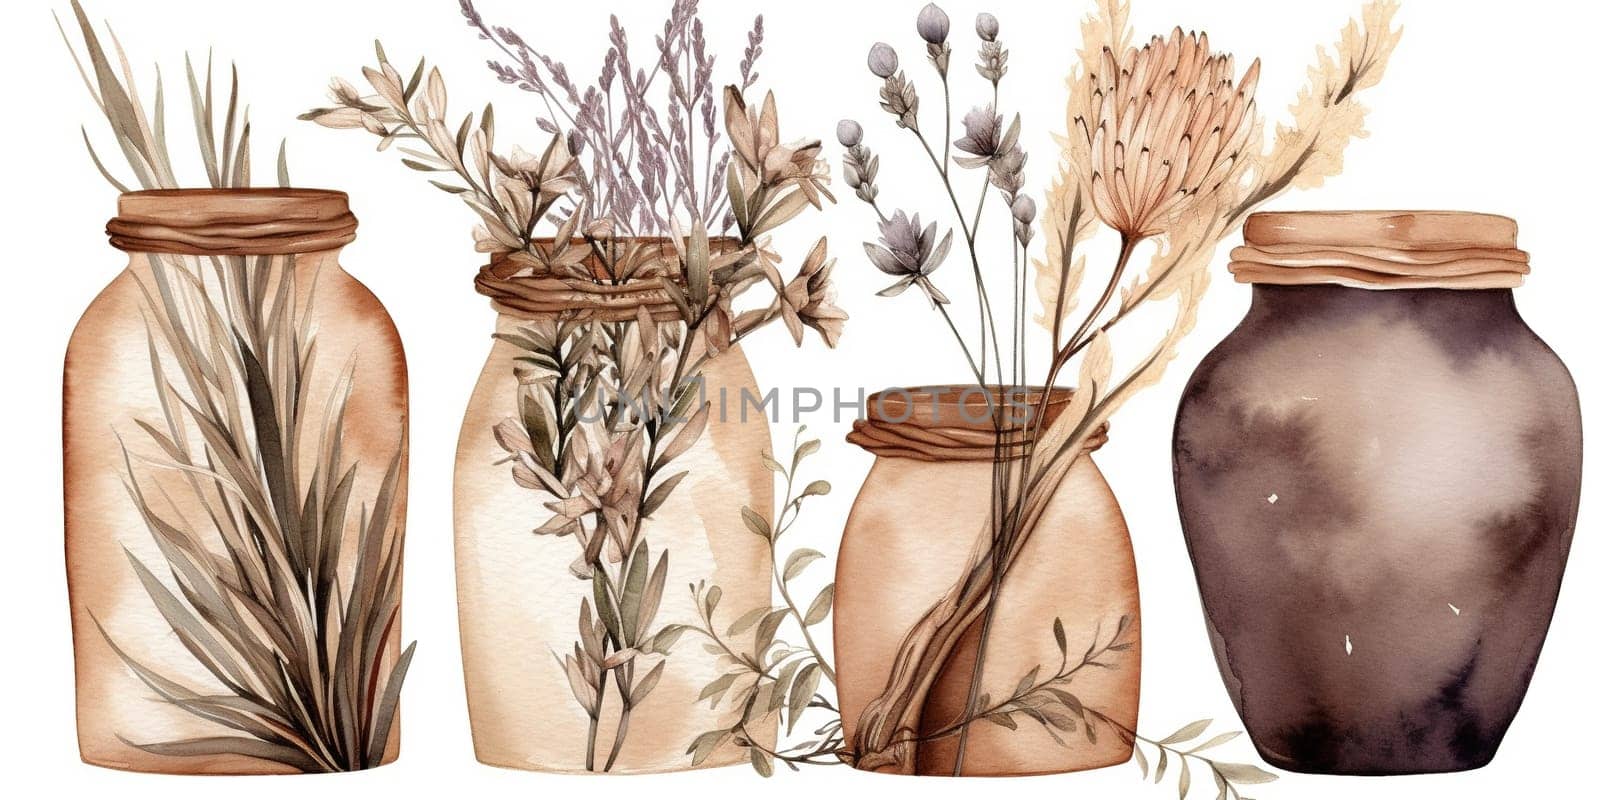 Watercolor Illustration Of Boho Jars With Dry Leaves And Flowers by GekaSkr